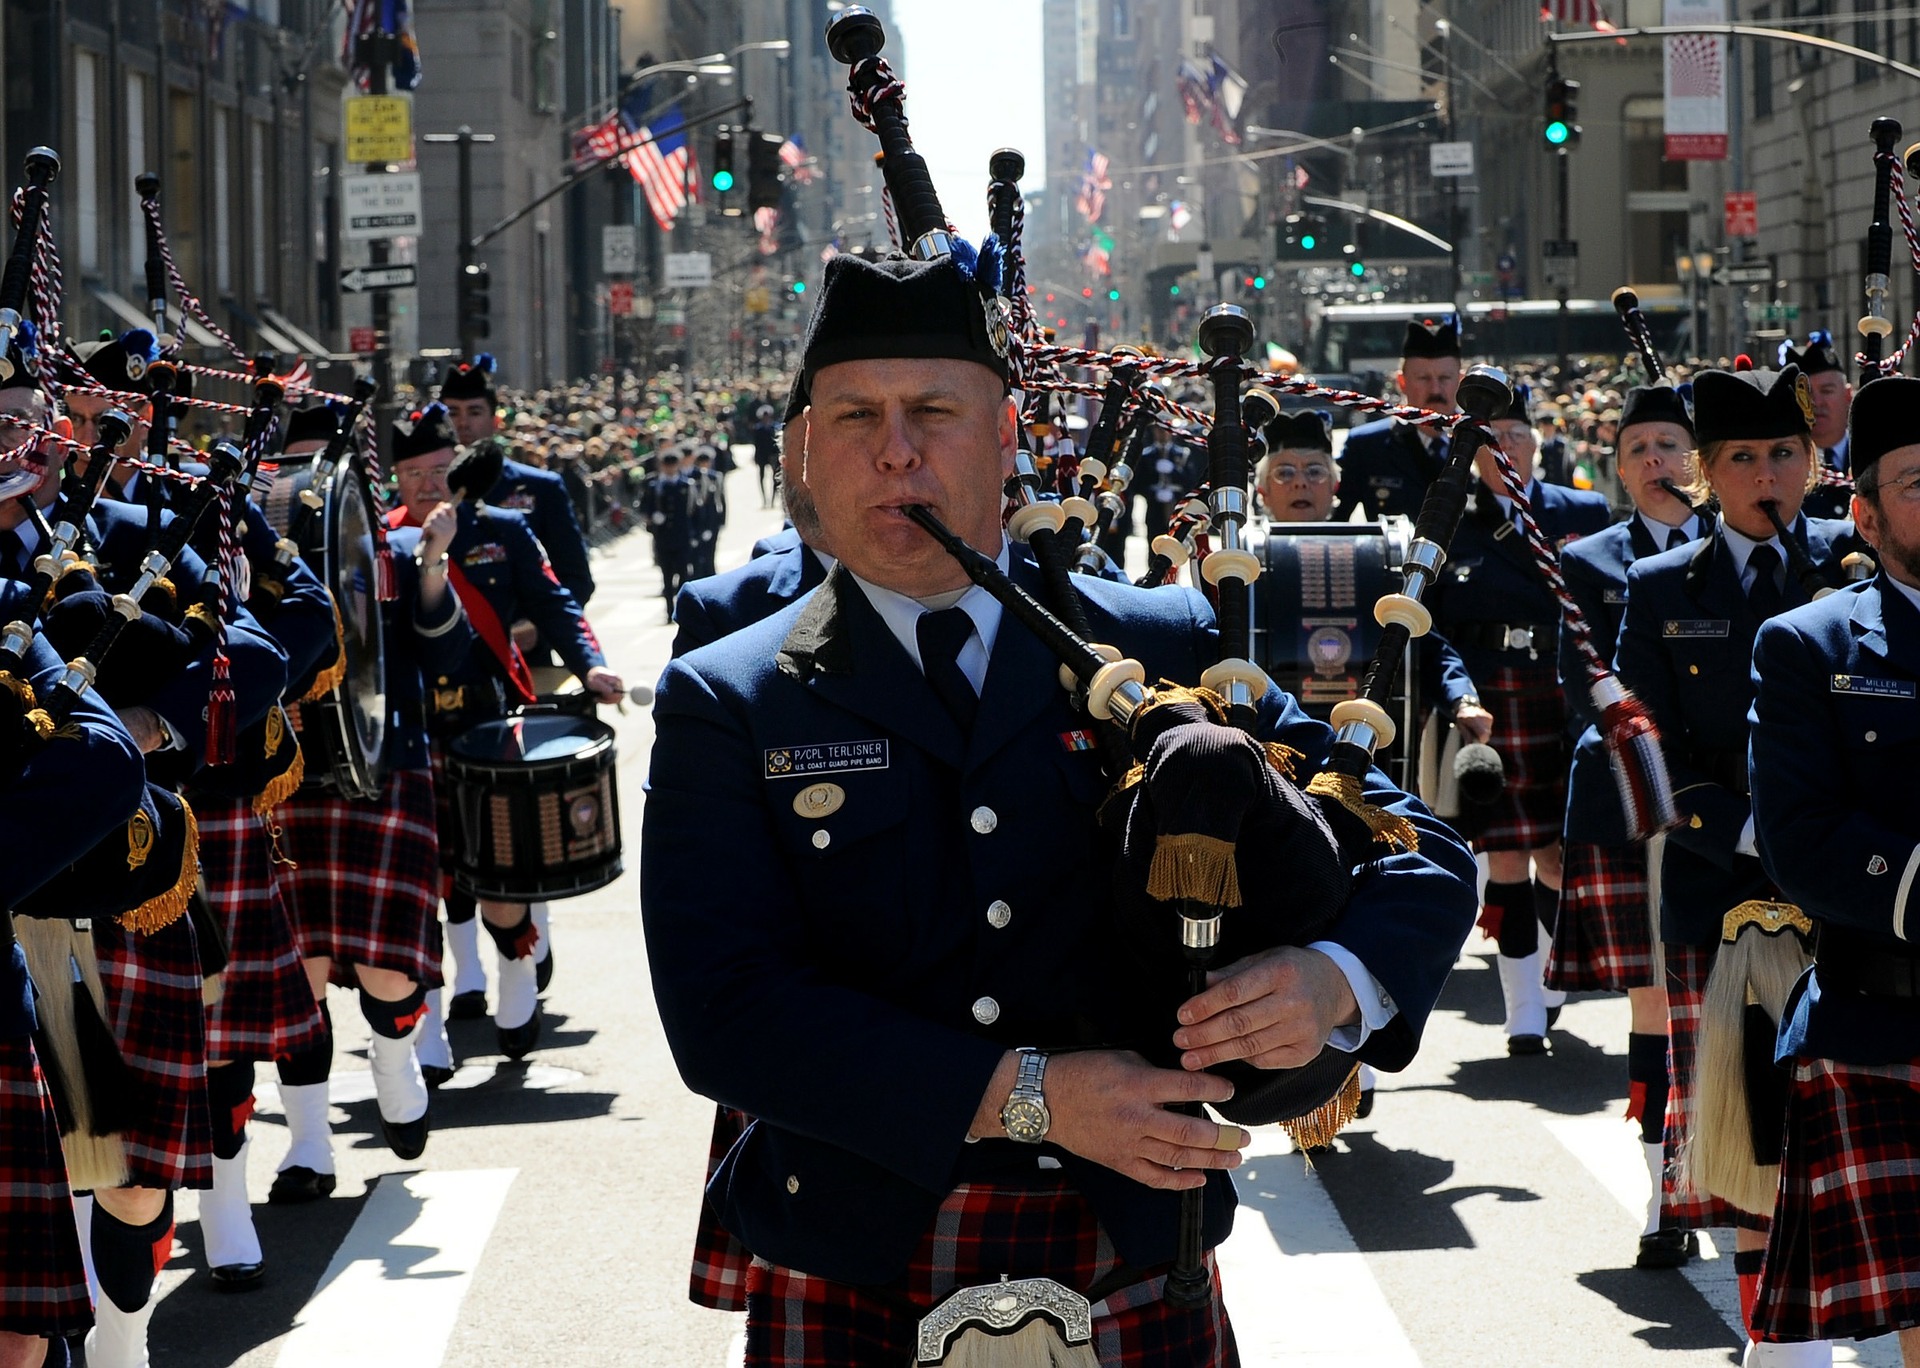 Join McCready Law at the South Side Irish Parade, Cook, Illinois, United States